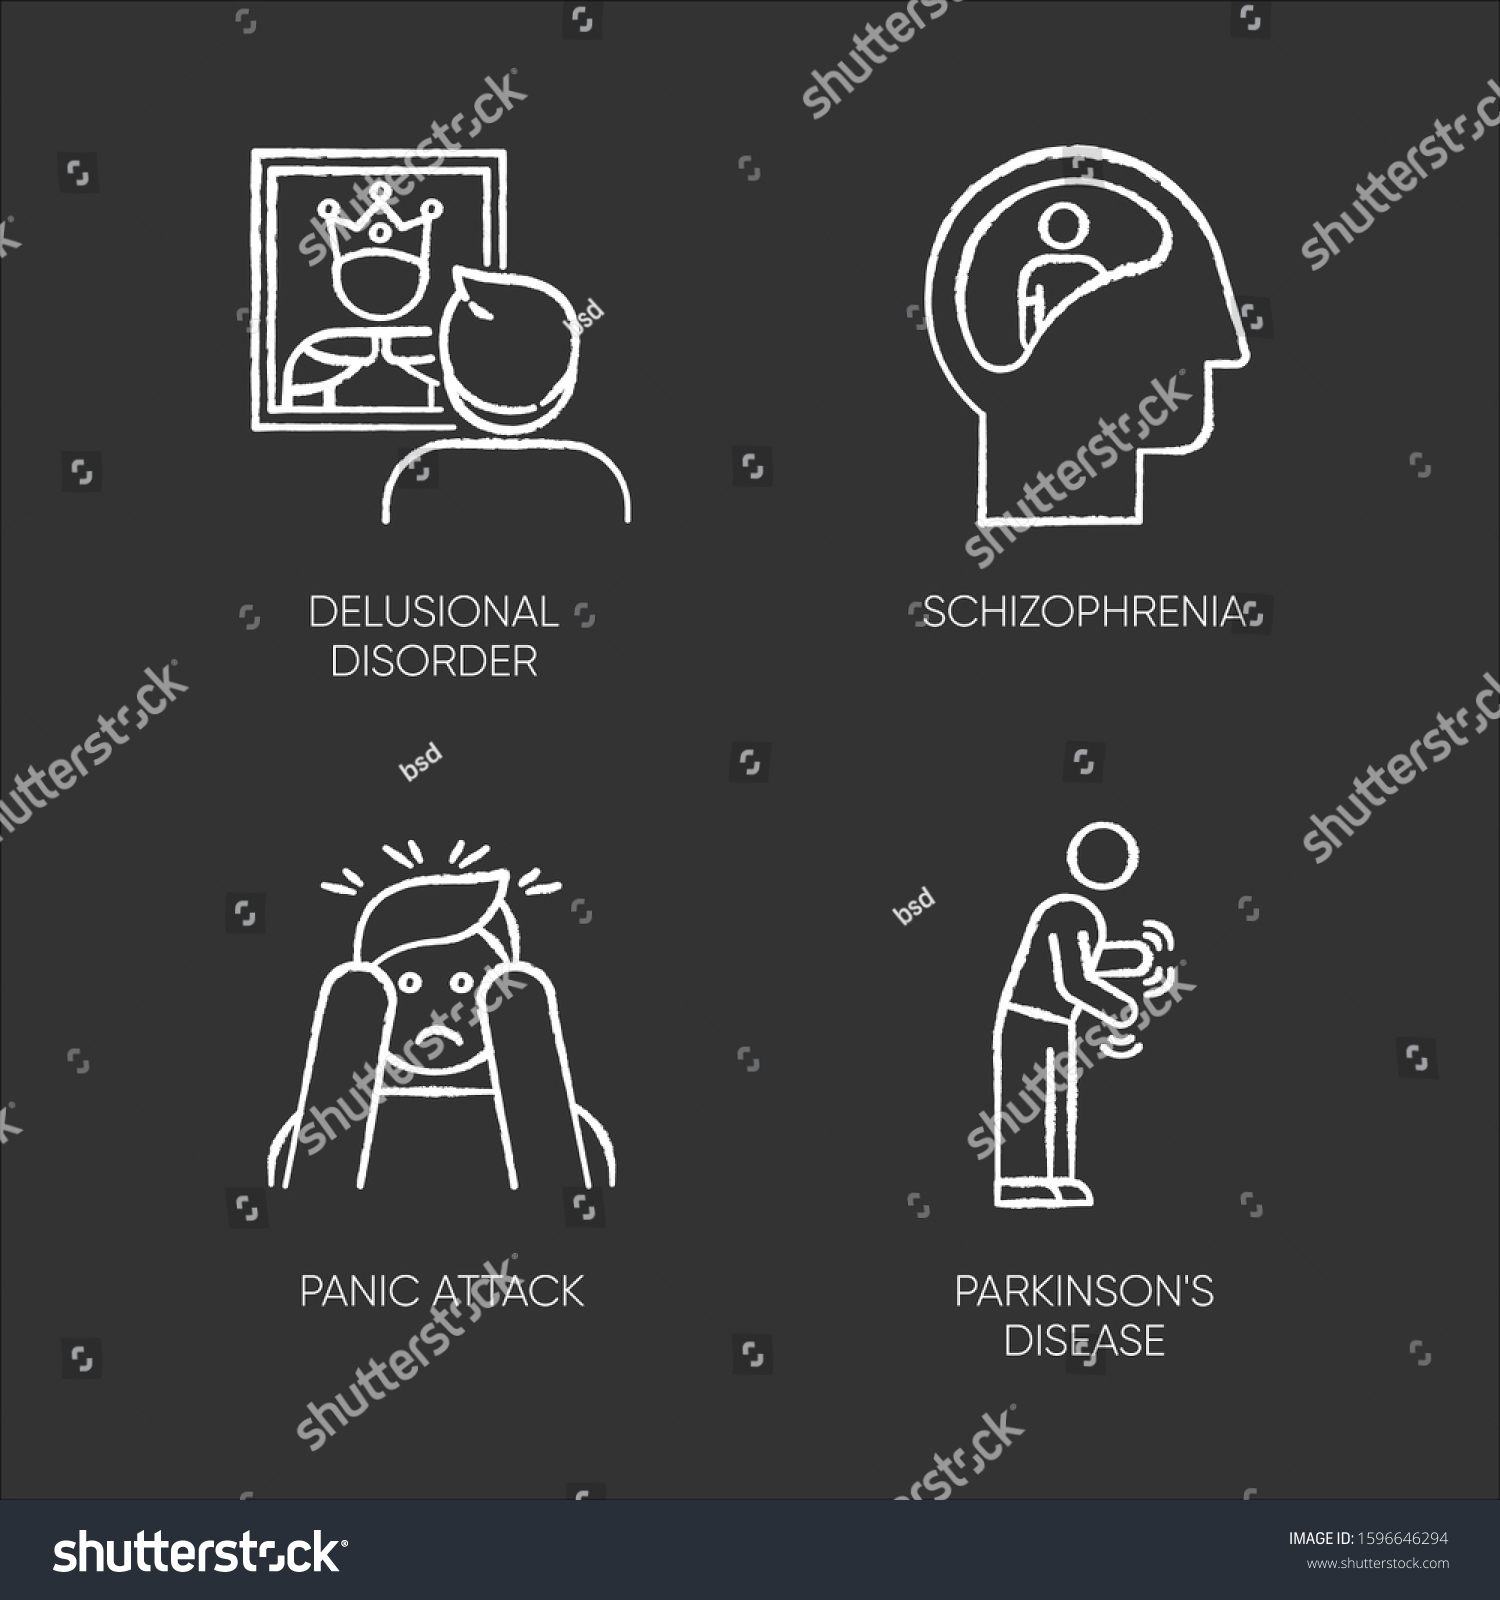 Mental Disorder Chalk Icons Set Delusional Stock Vector Royalty Free 1596646294 Shutterstock 4006